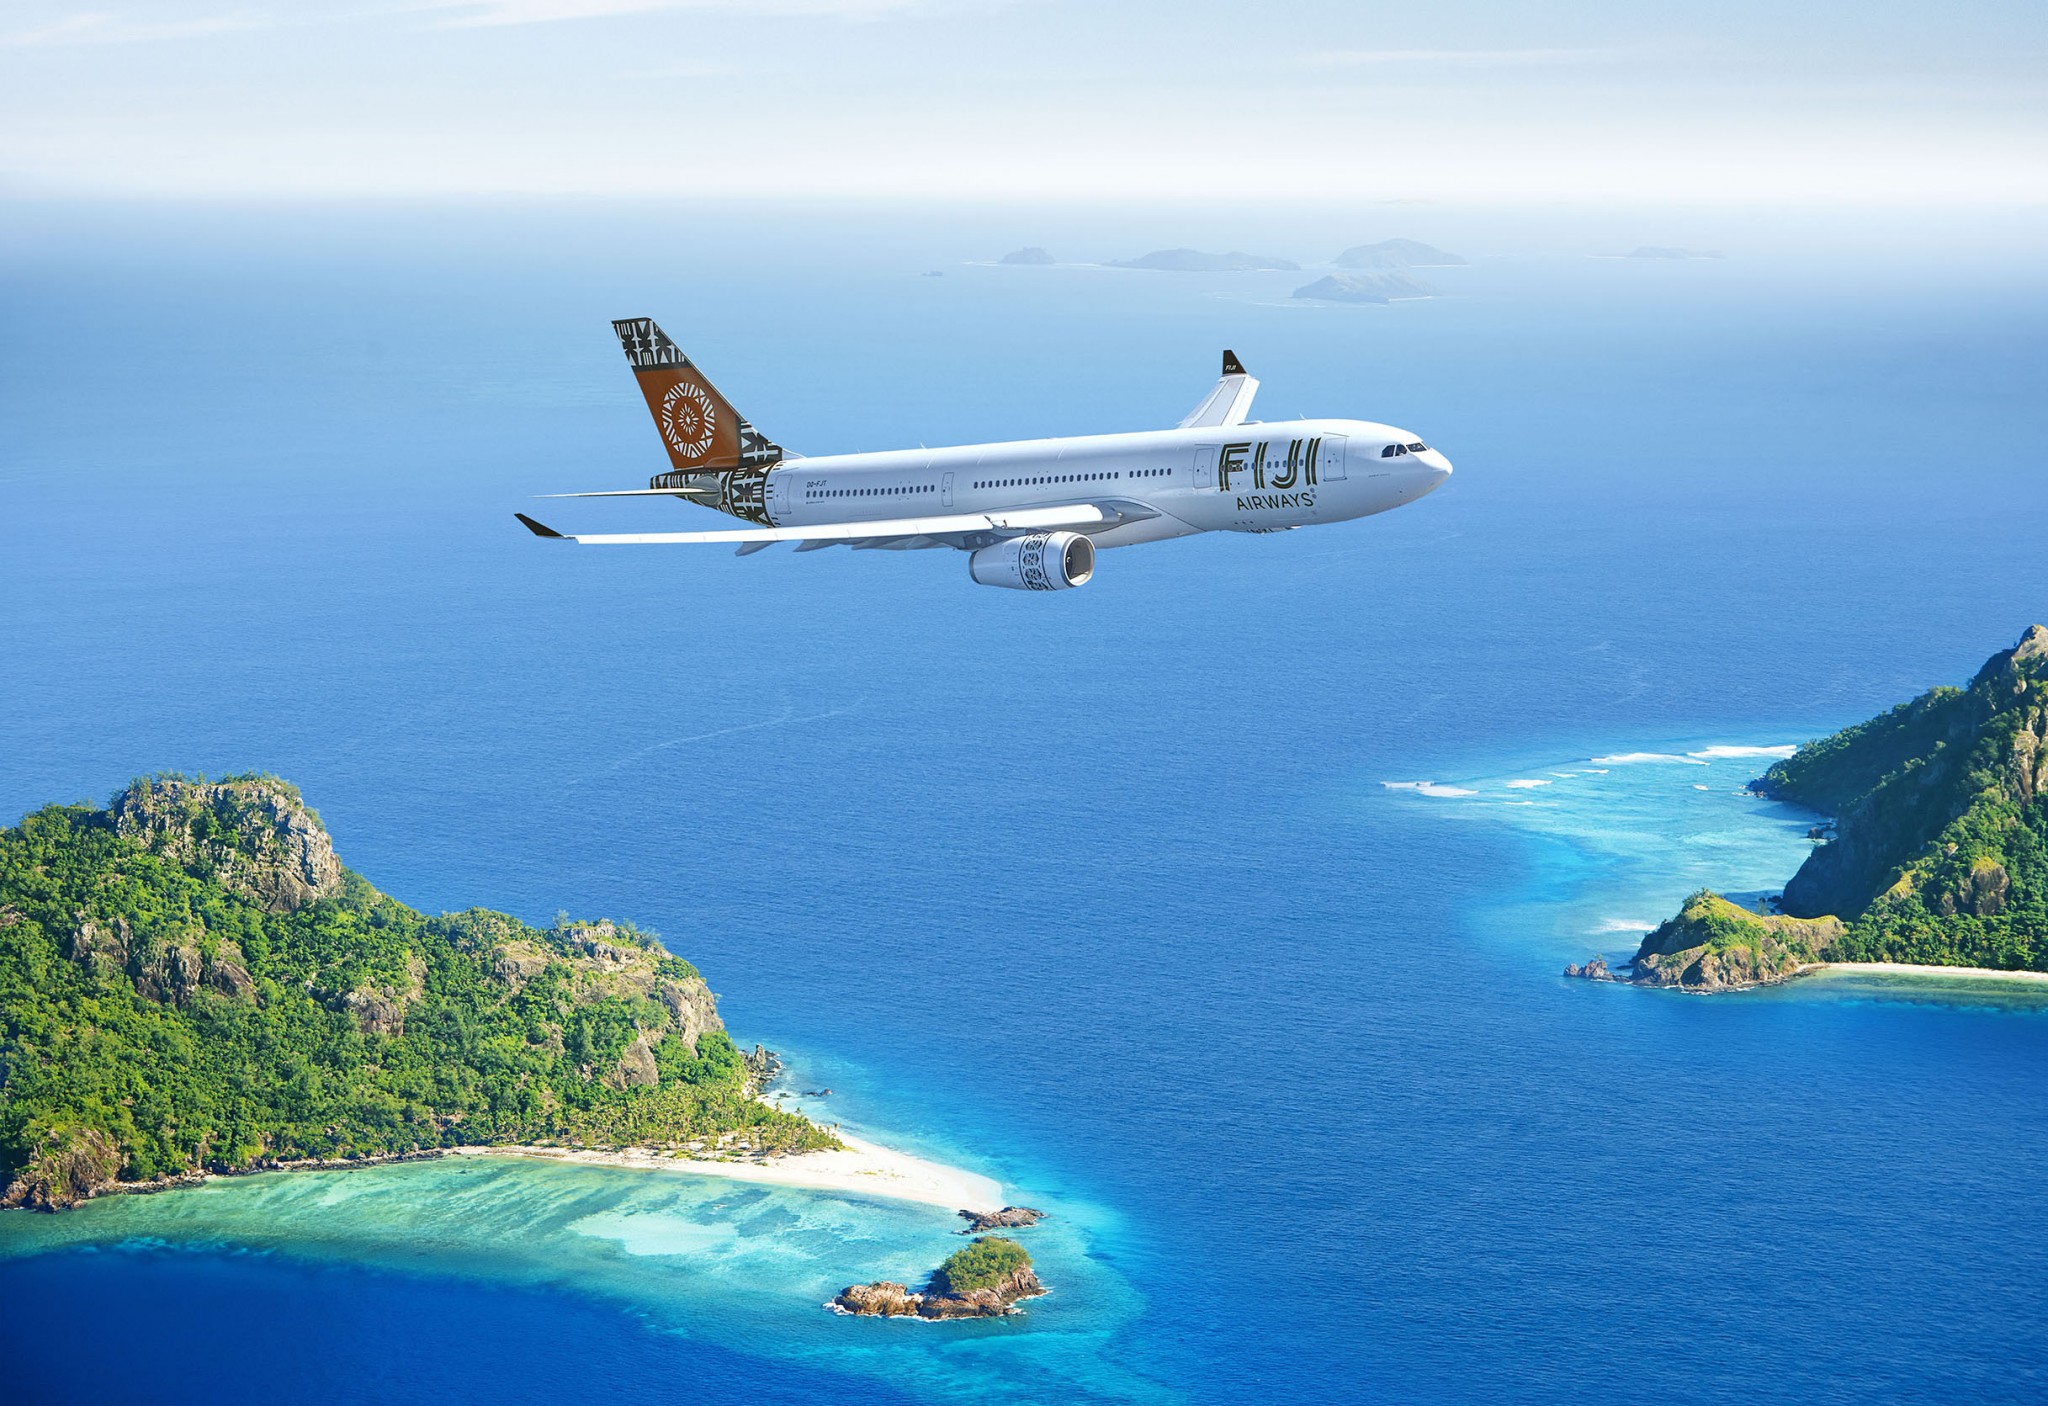 Fiji Airways intends to purchase 737 MAX 8s